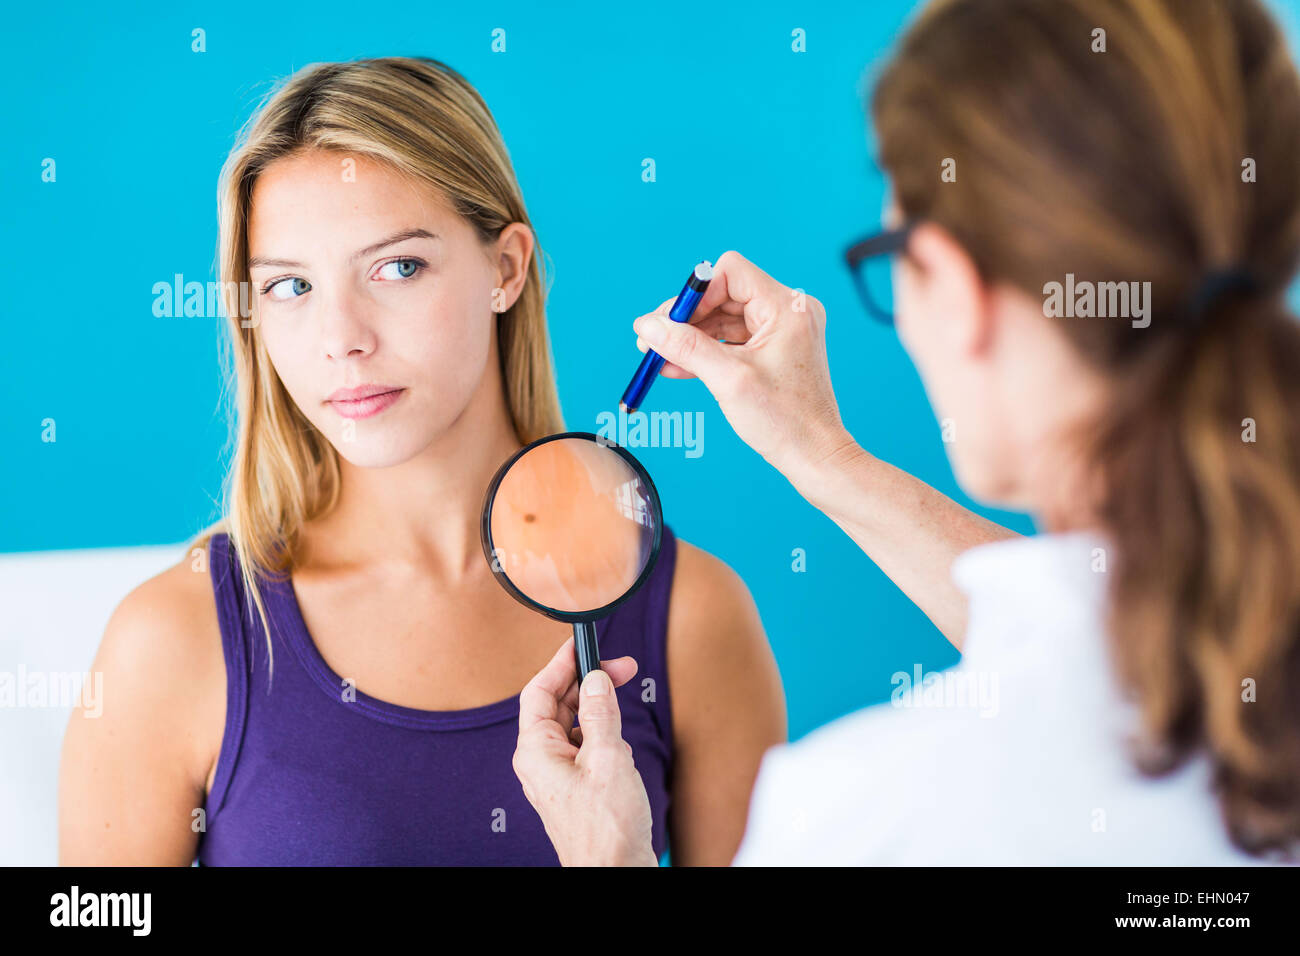 Doctor examining the skin of a woman. Stock Photo